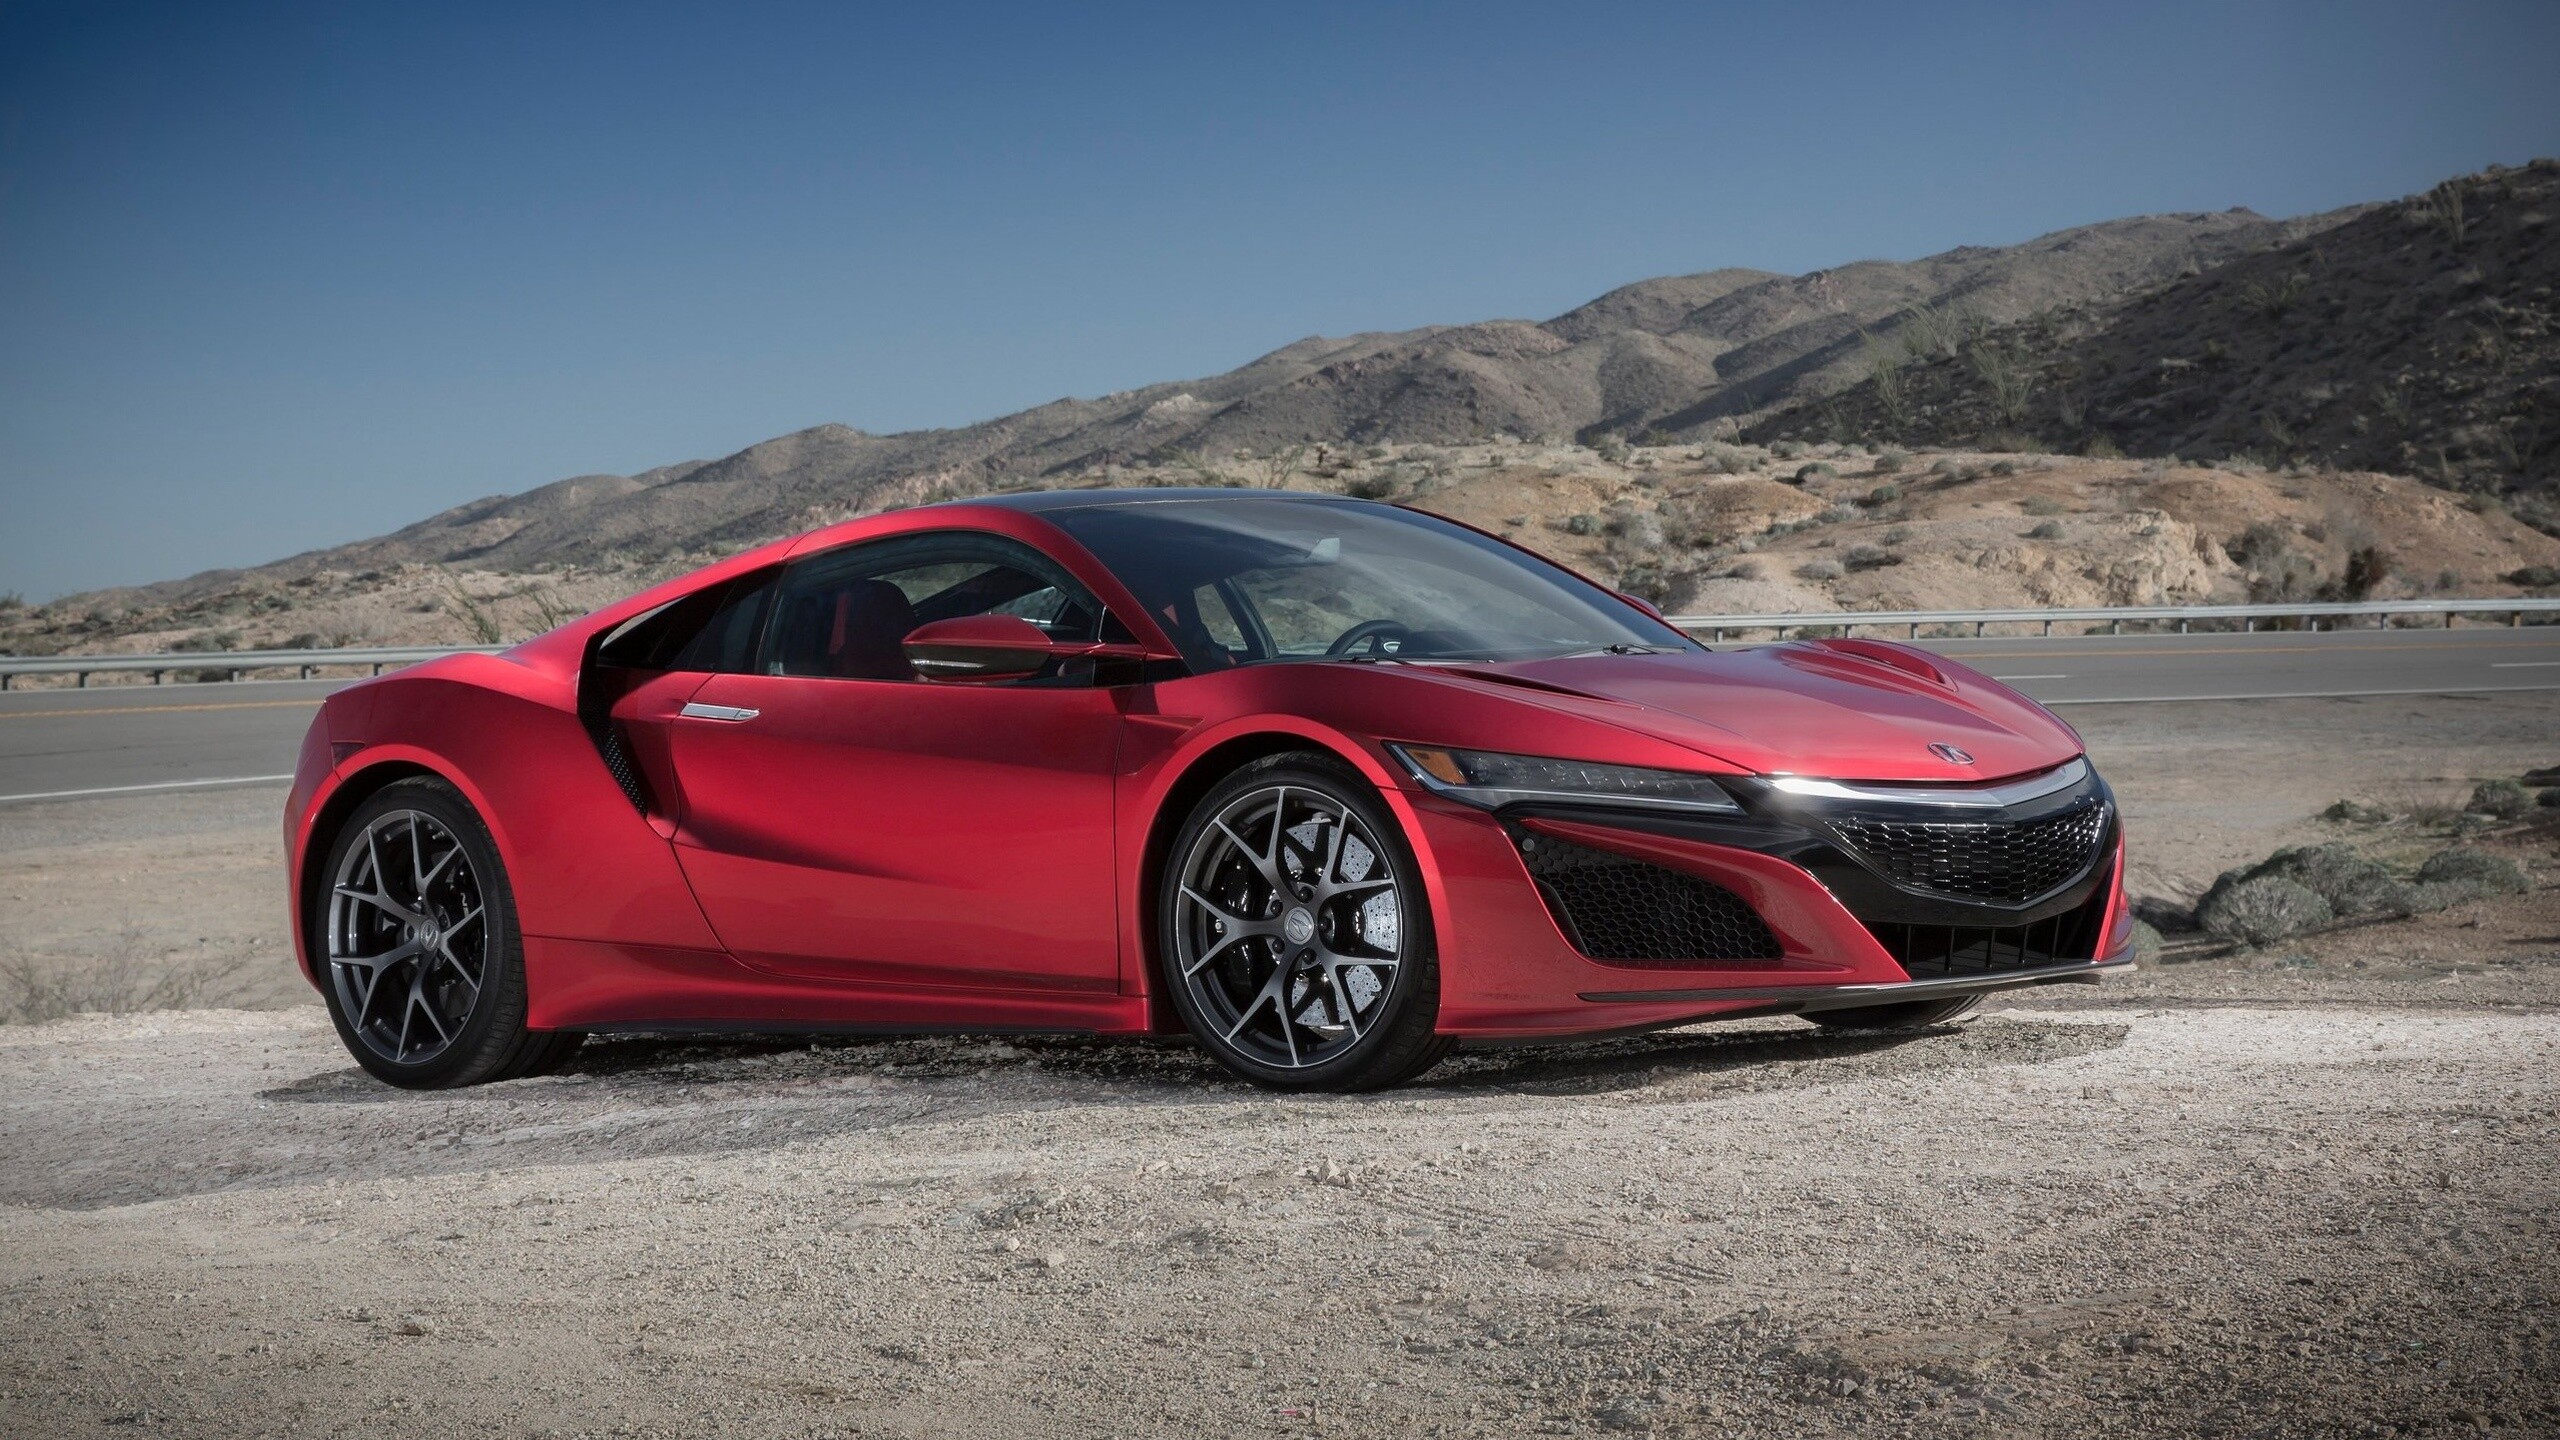 Acura NSX backgrounds, Automotive artistry, High-quality images, Exquisite visuals, 2560x1440 HD Desktop